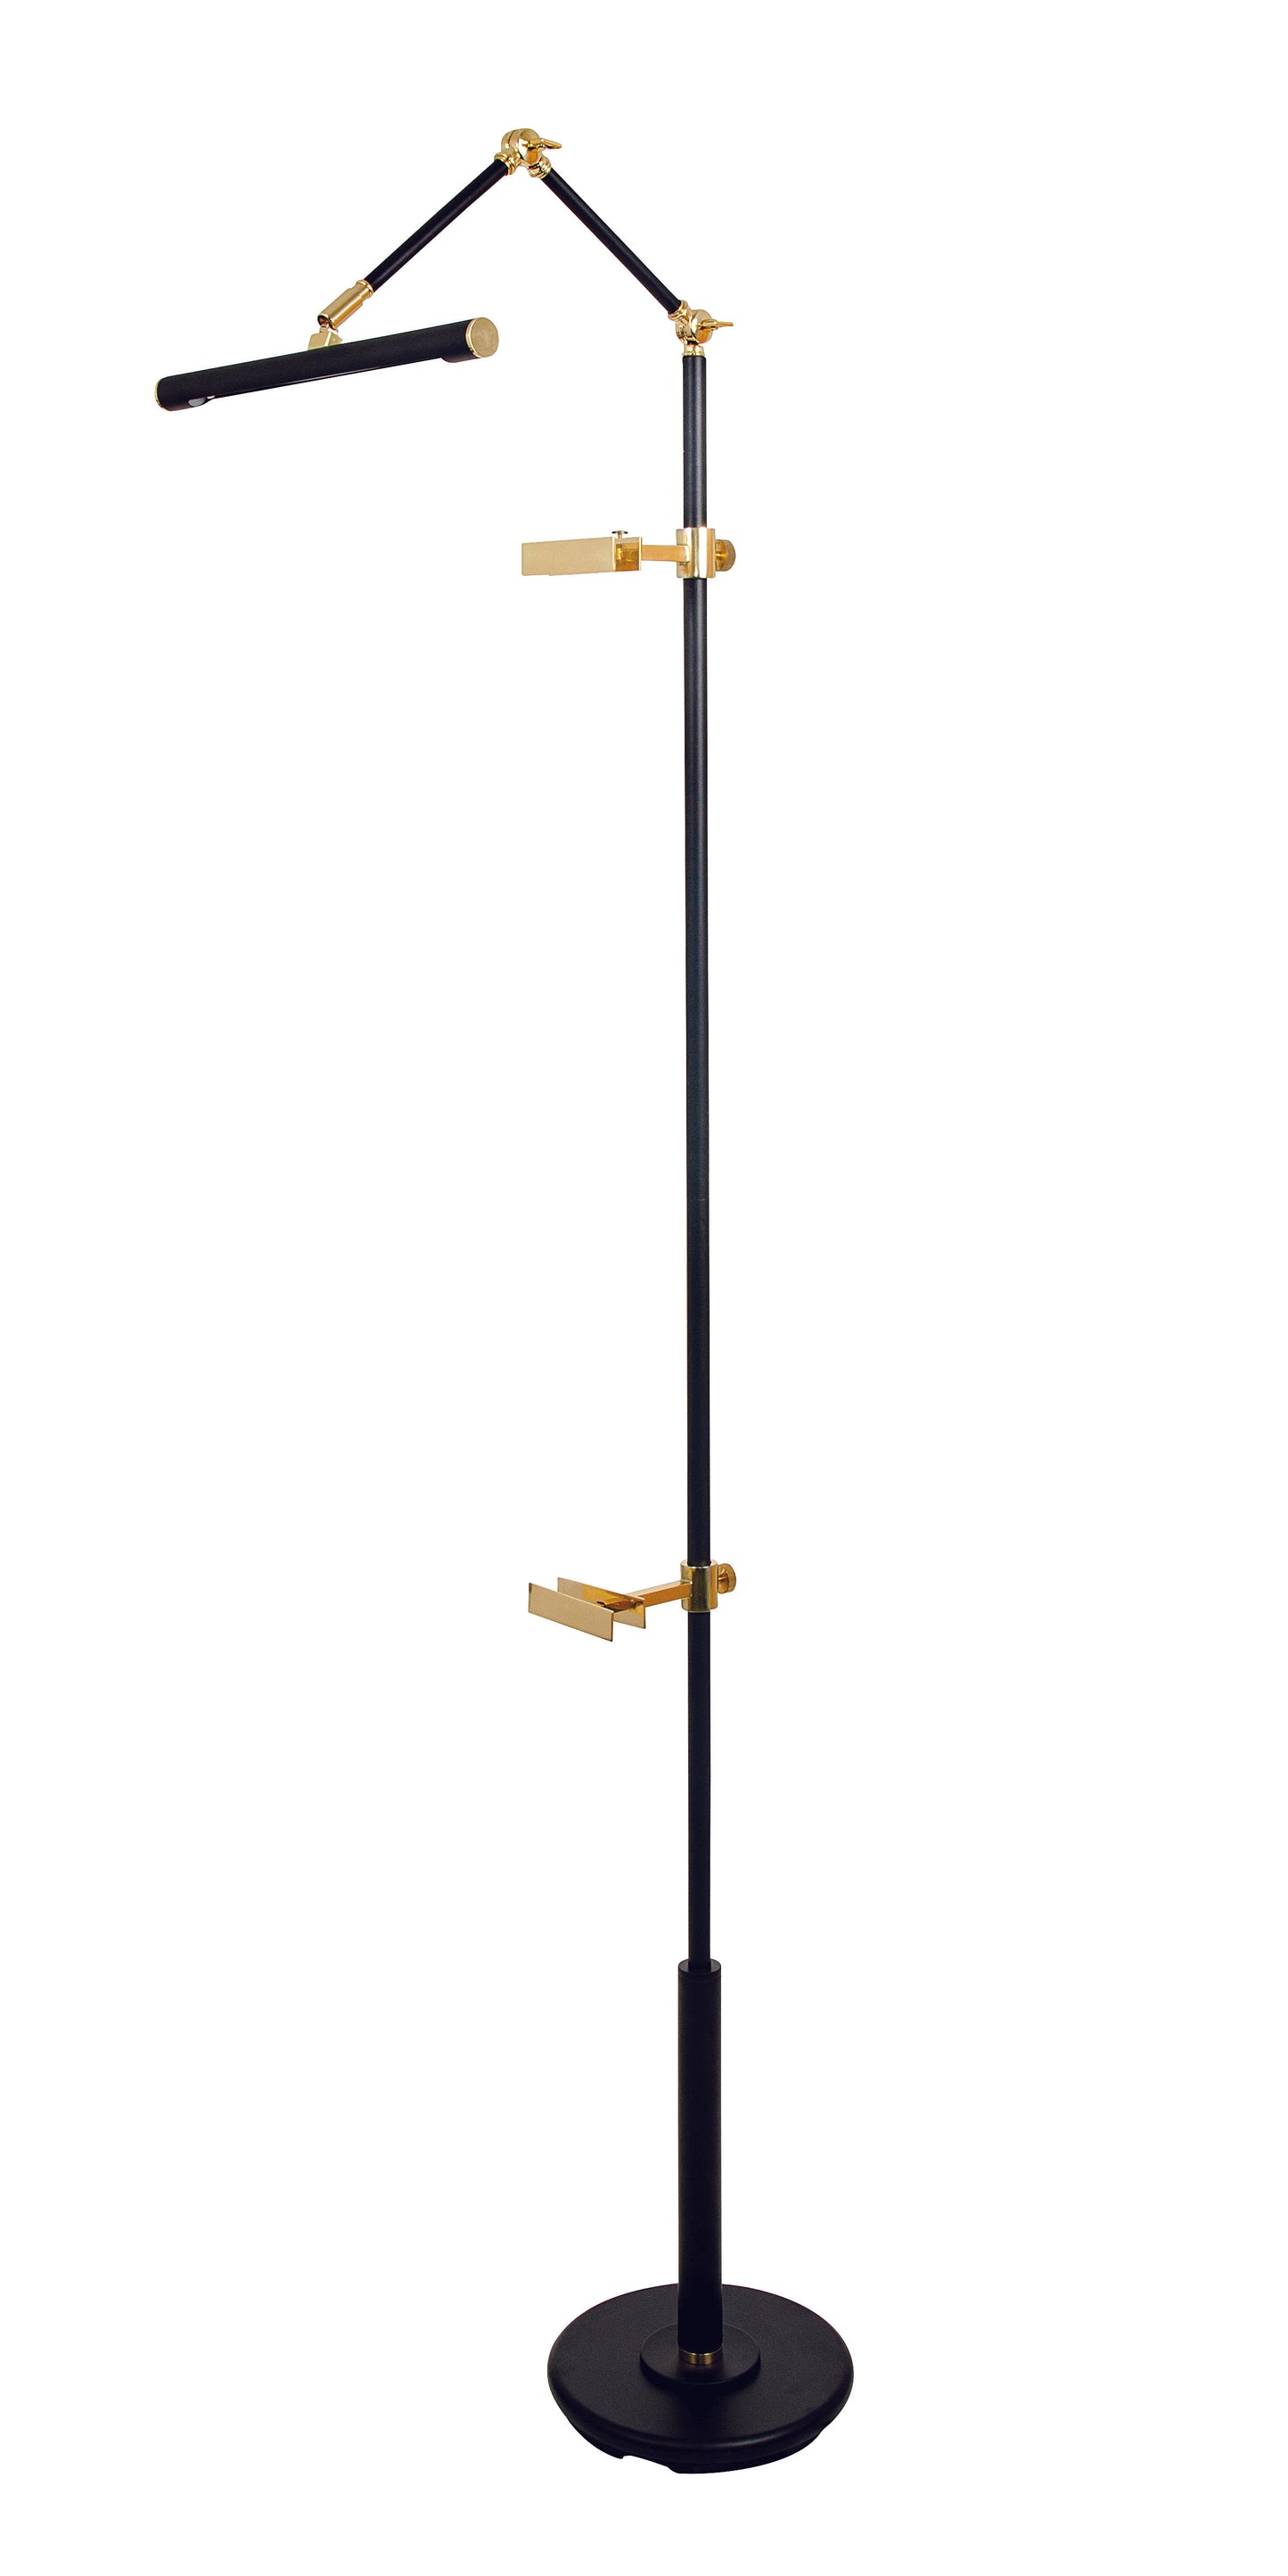 House of Troy River North Easel floor lamp black and polished brass accents LED slimline shade RN300-BLK/PB